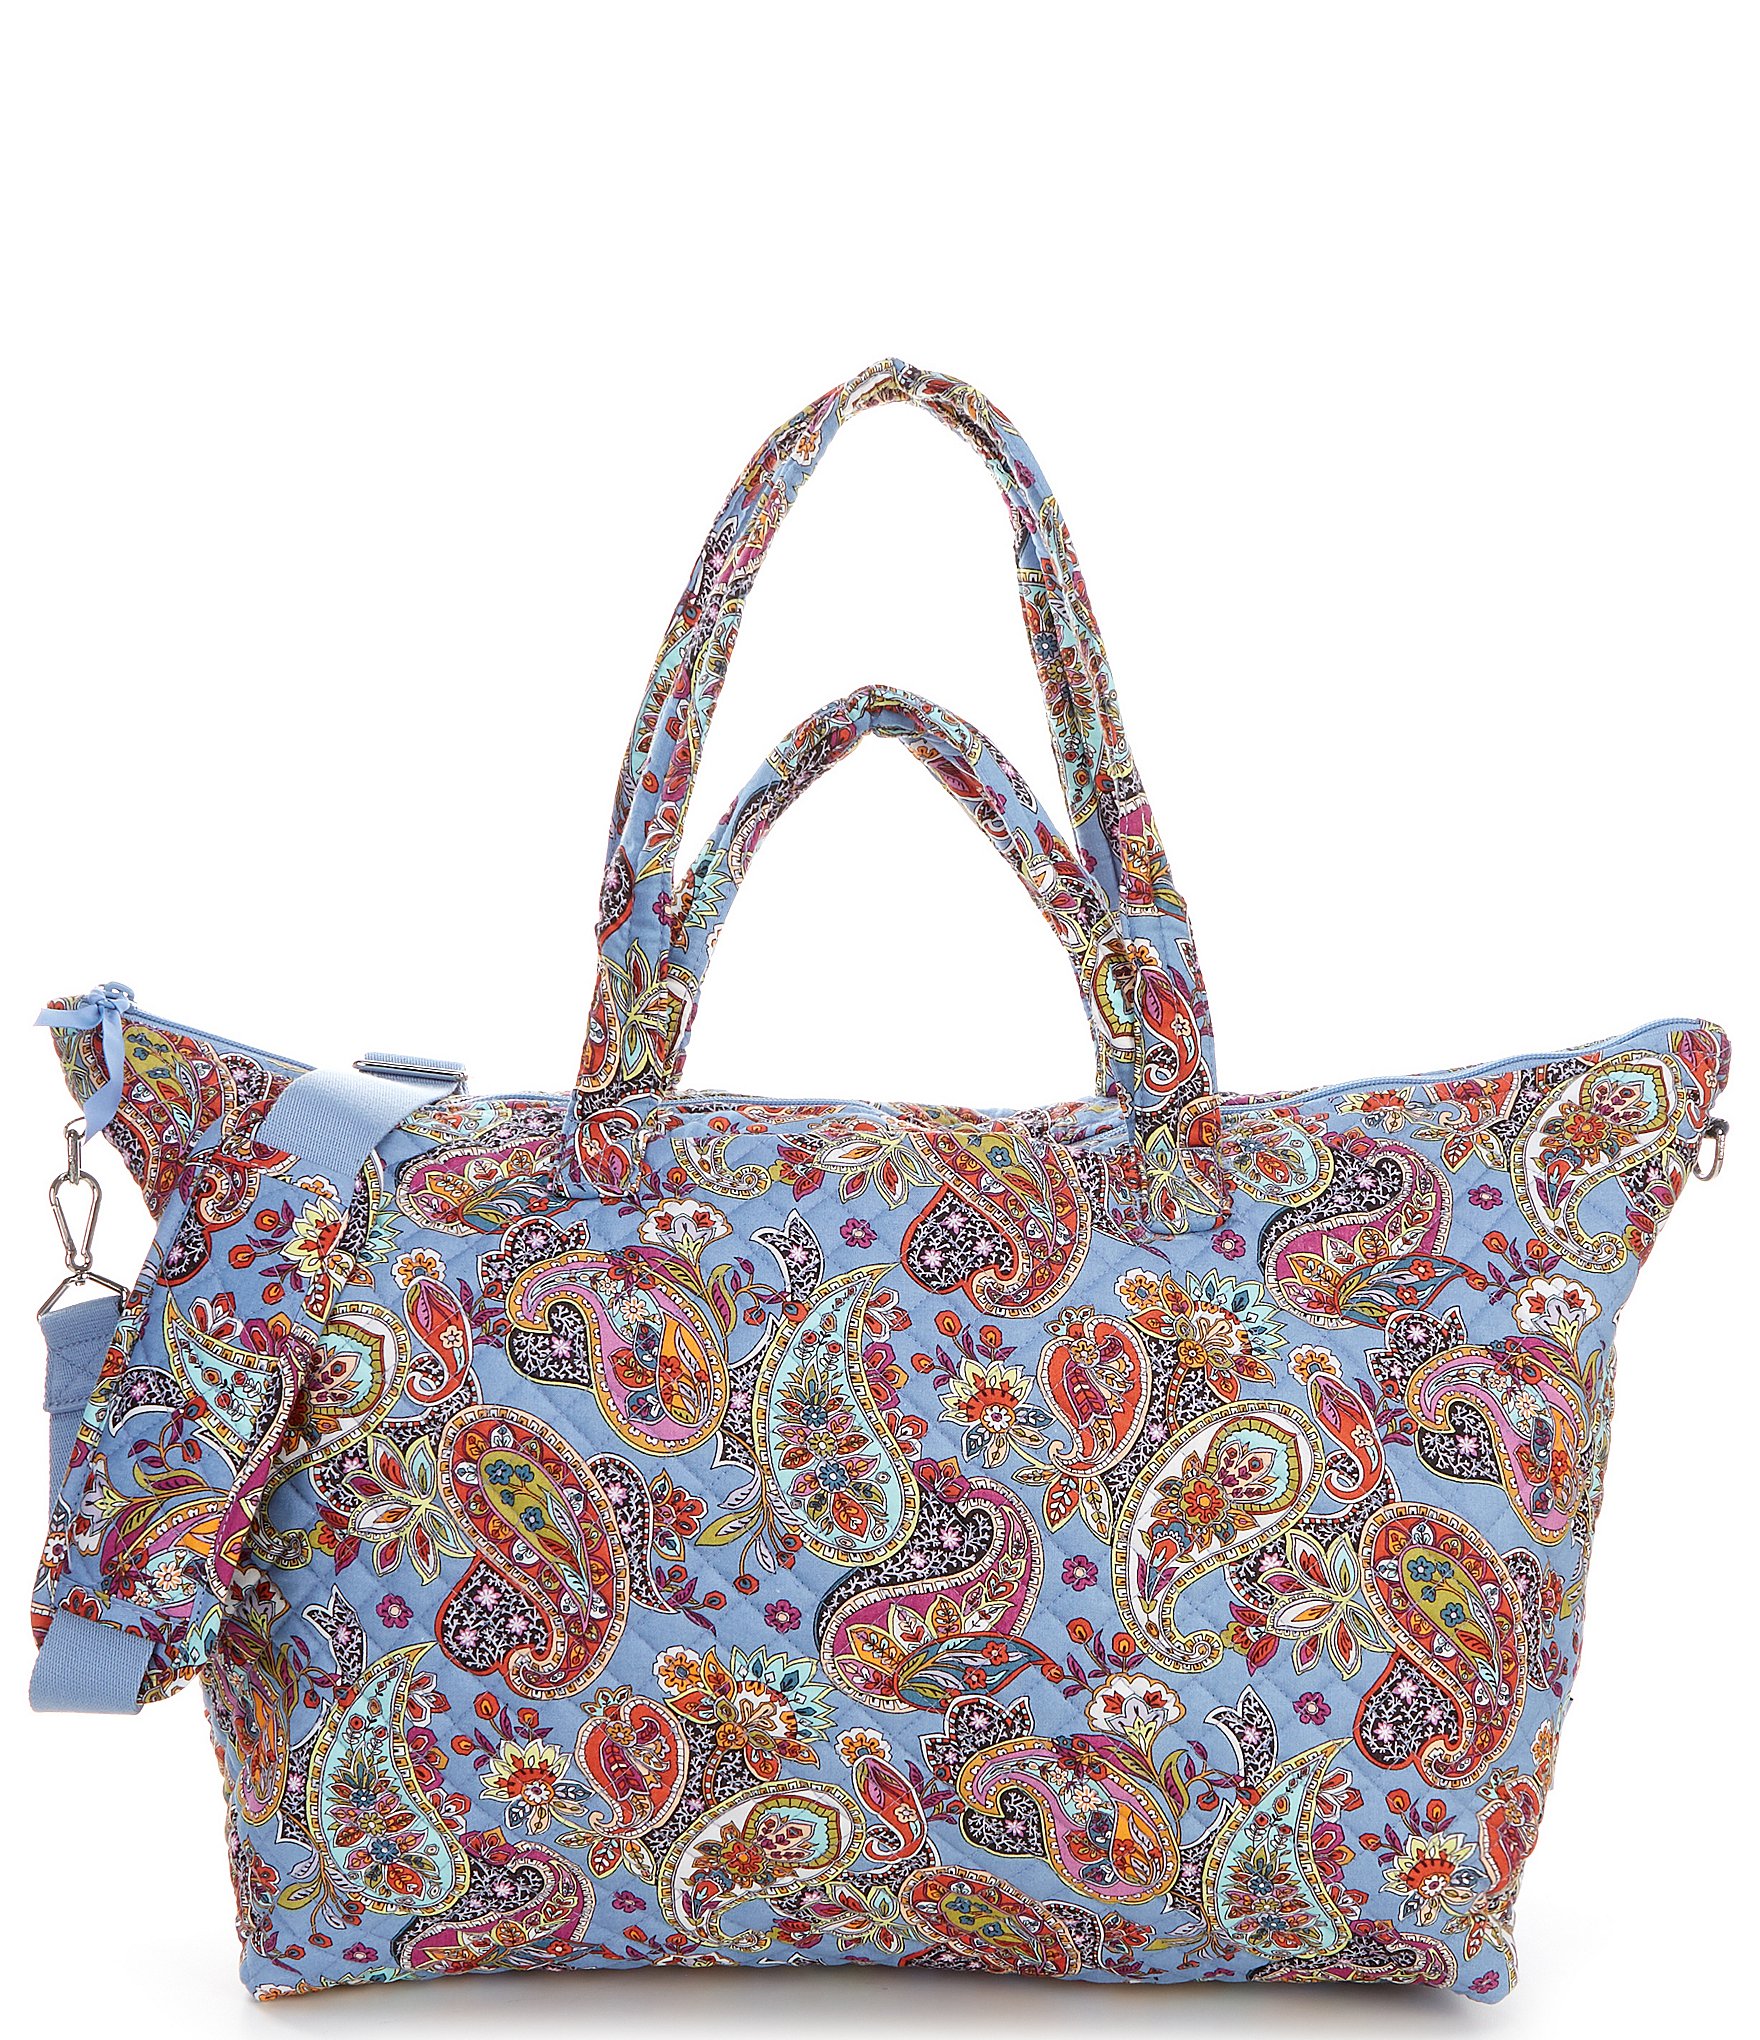 Triforce Savoir Collection Quilted with Floral Strap Travel Beauty